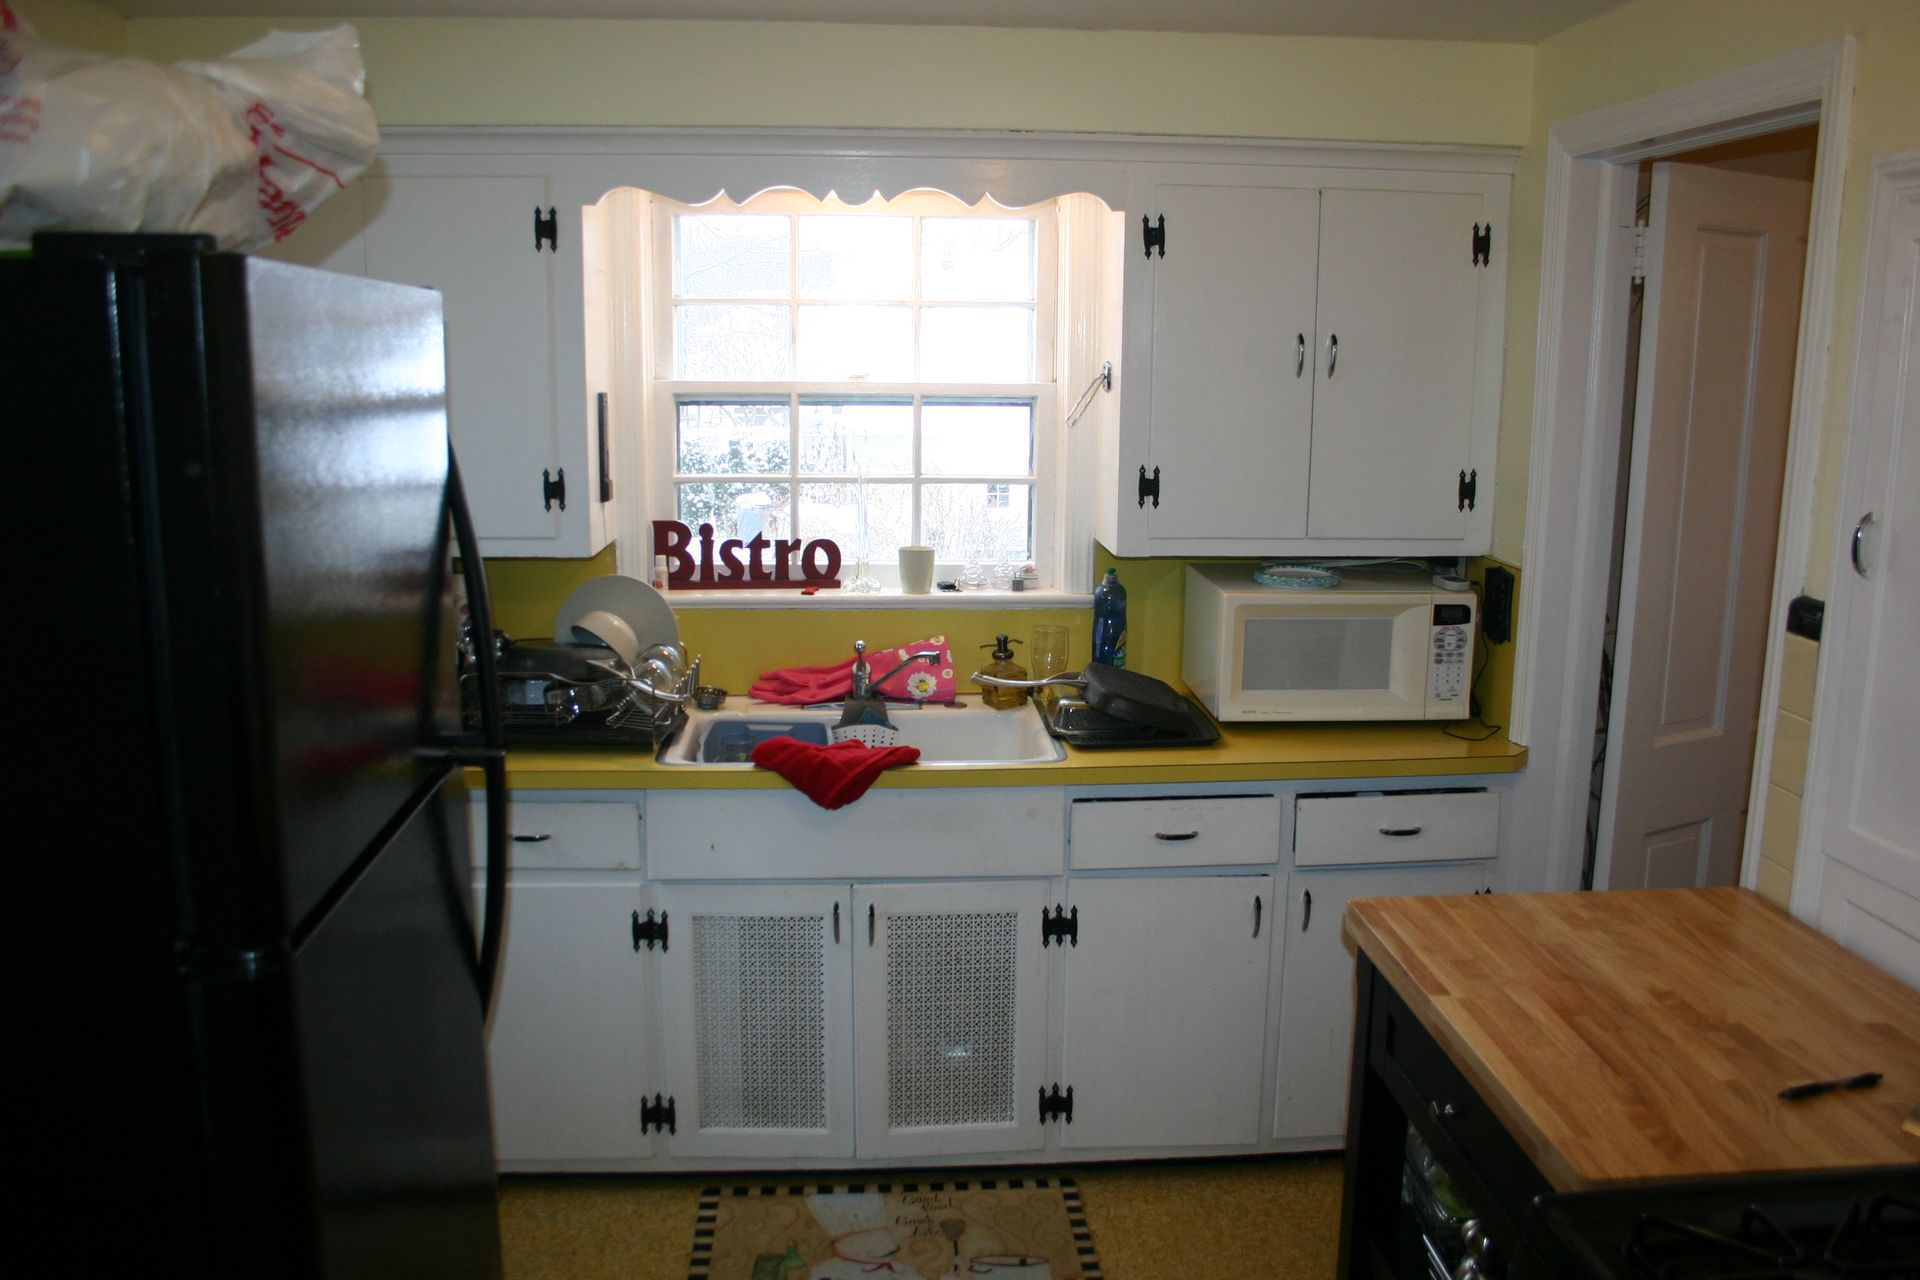 A kitchen with a sign that says bistro on it